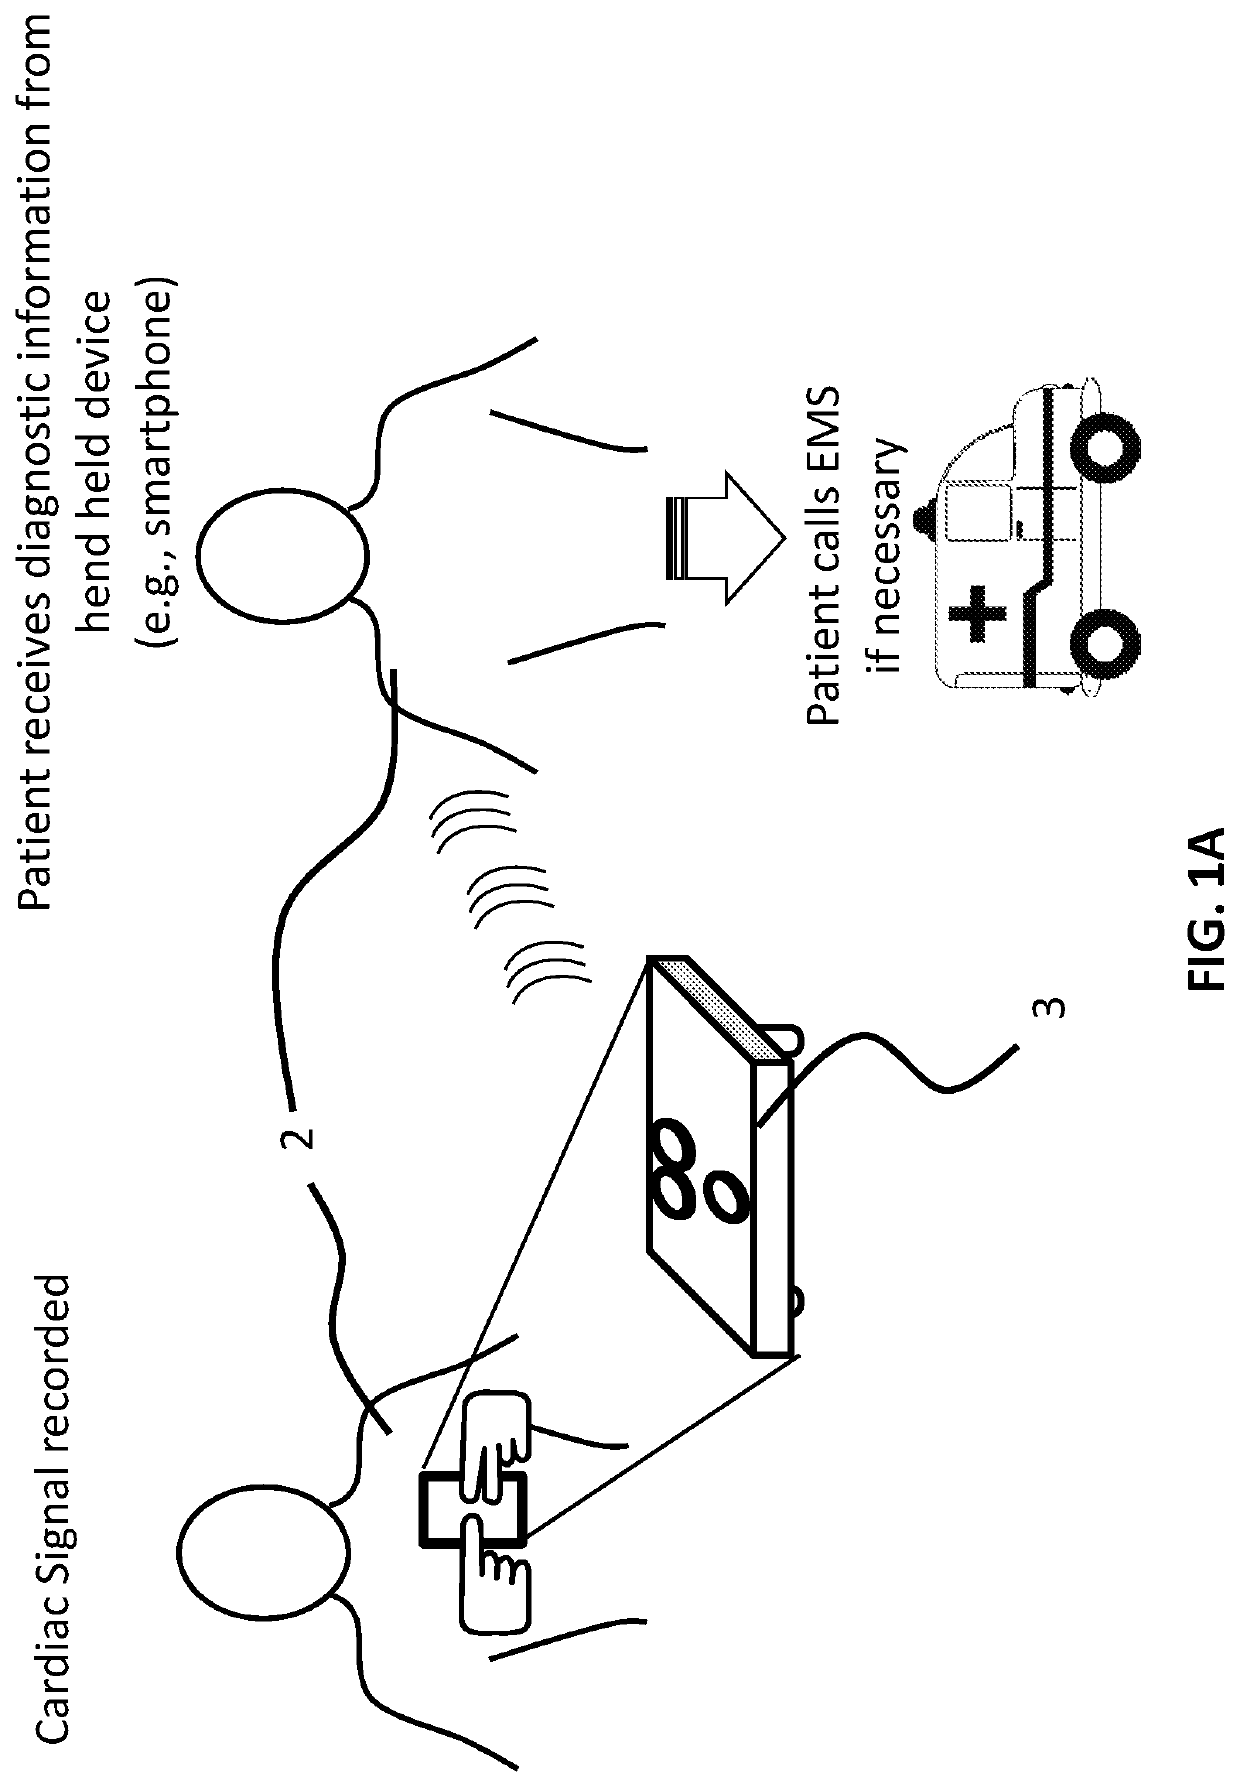 Hand held device for automatic cardiac risk and diagnostic assessment